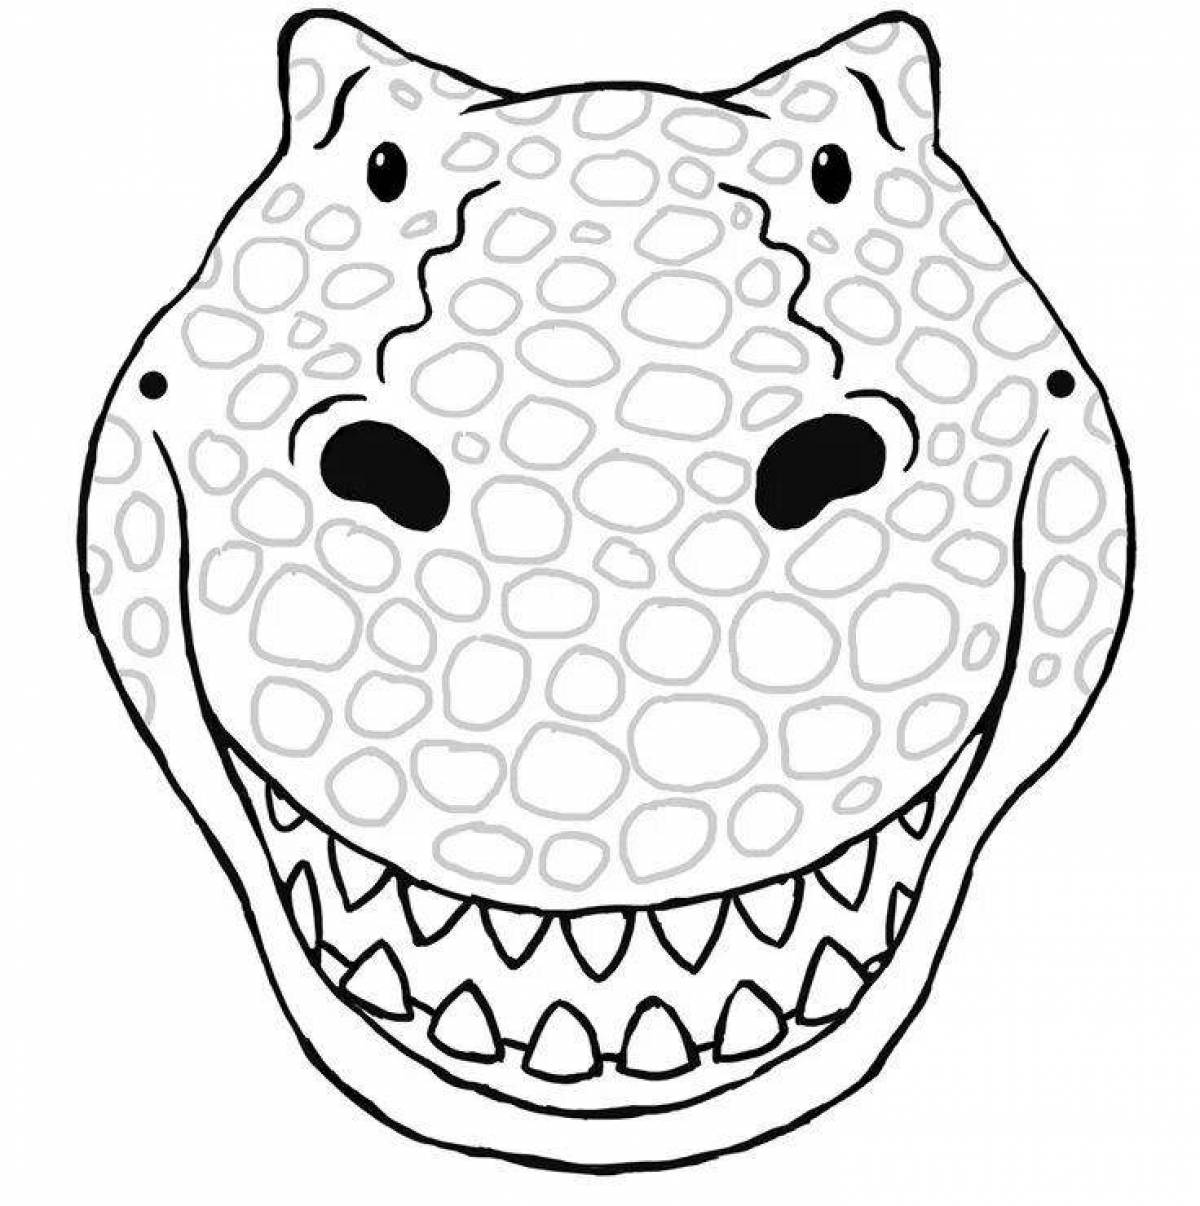 Ornate lizard mask coloring page